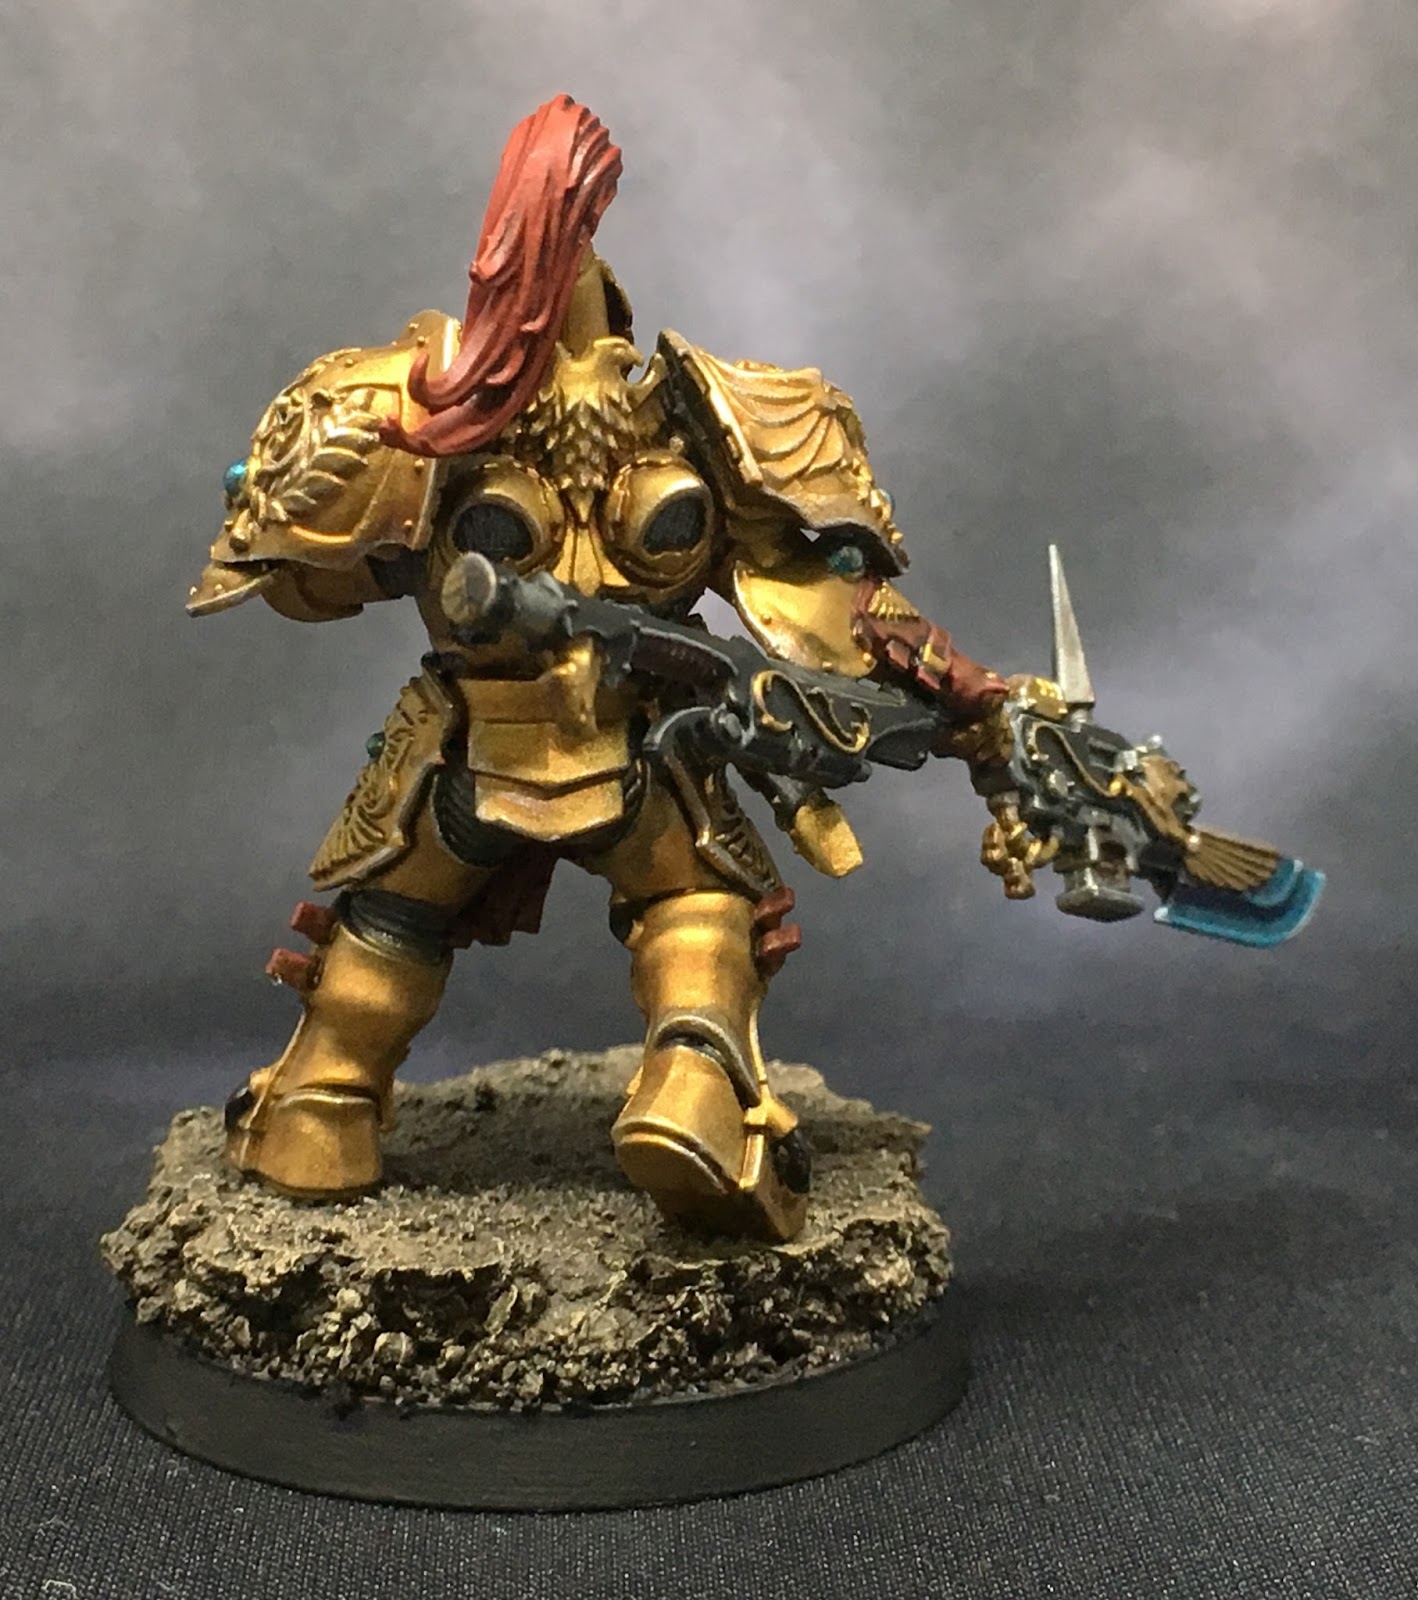 How is Custodes Power Armor... Well powered? : r/40kLore